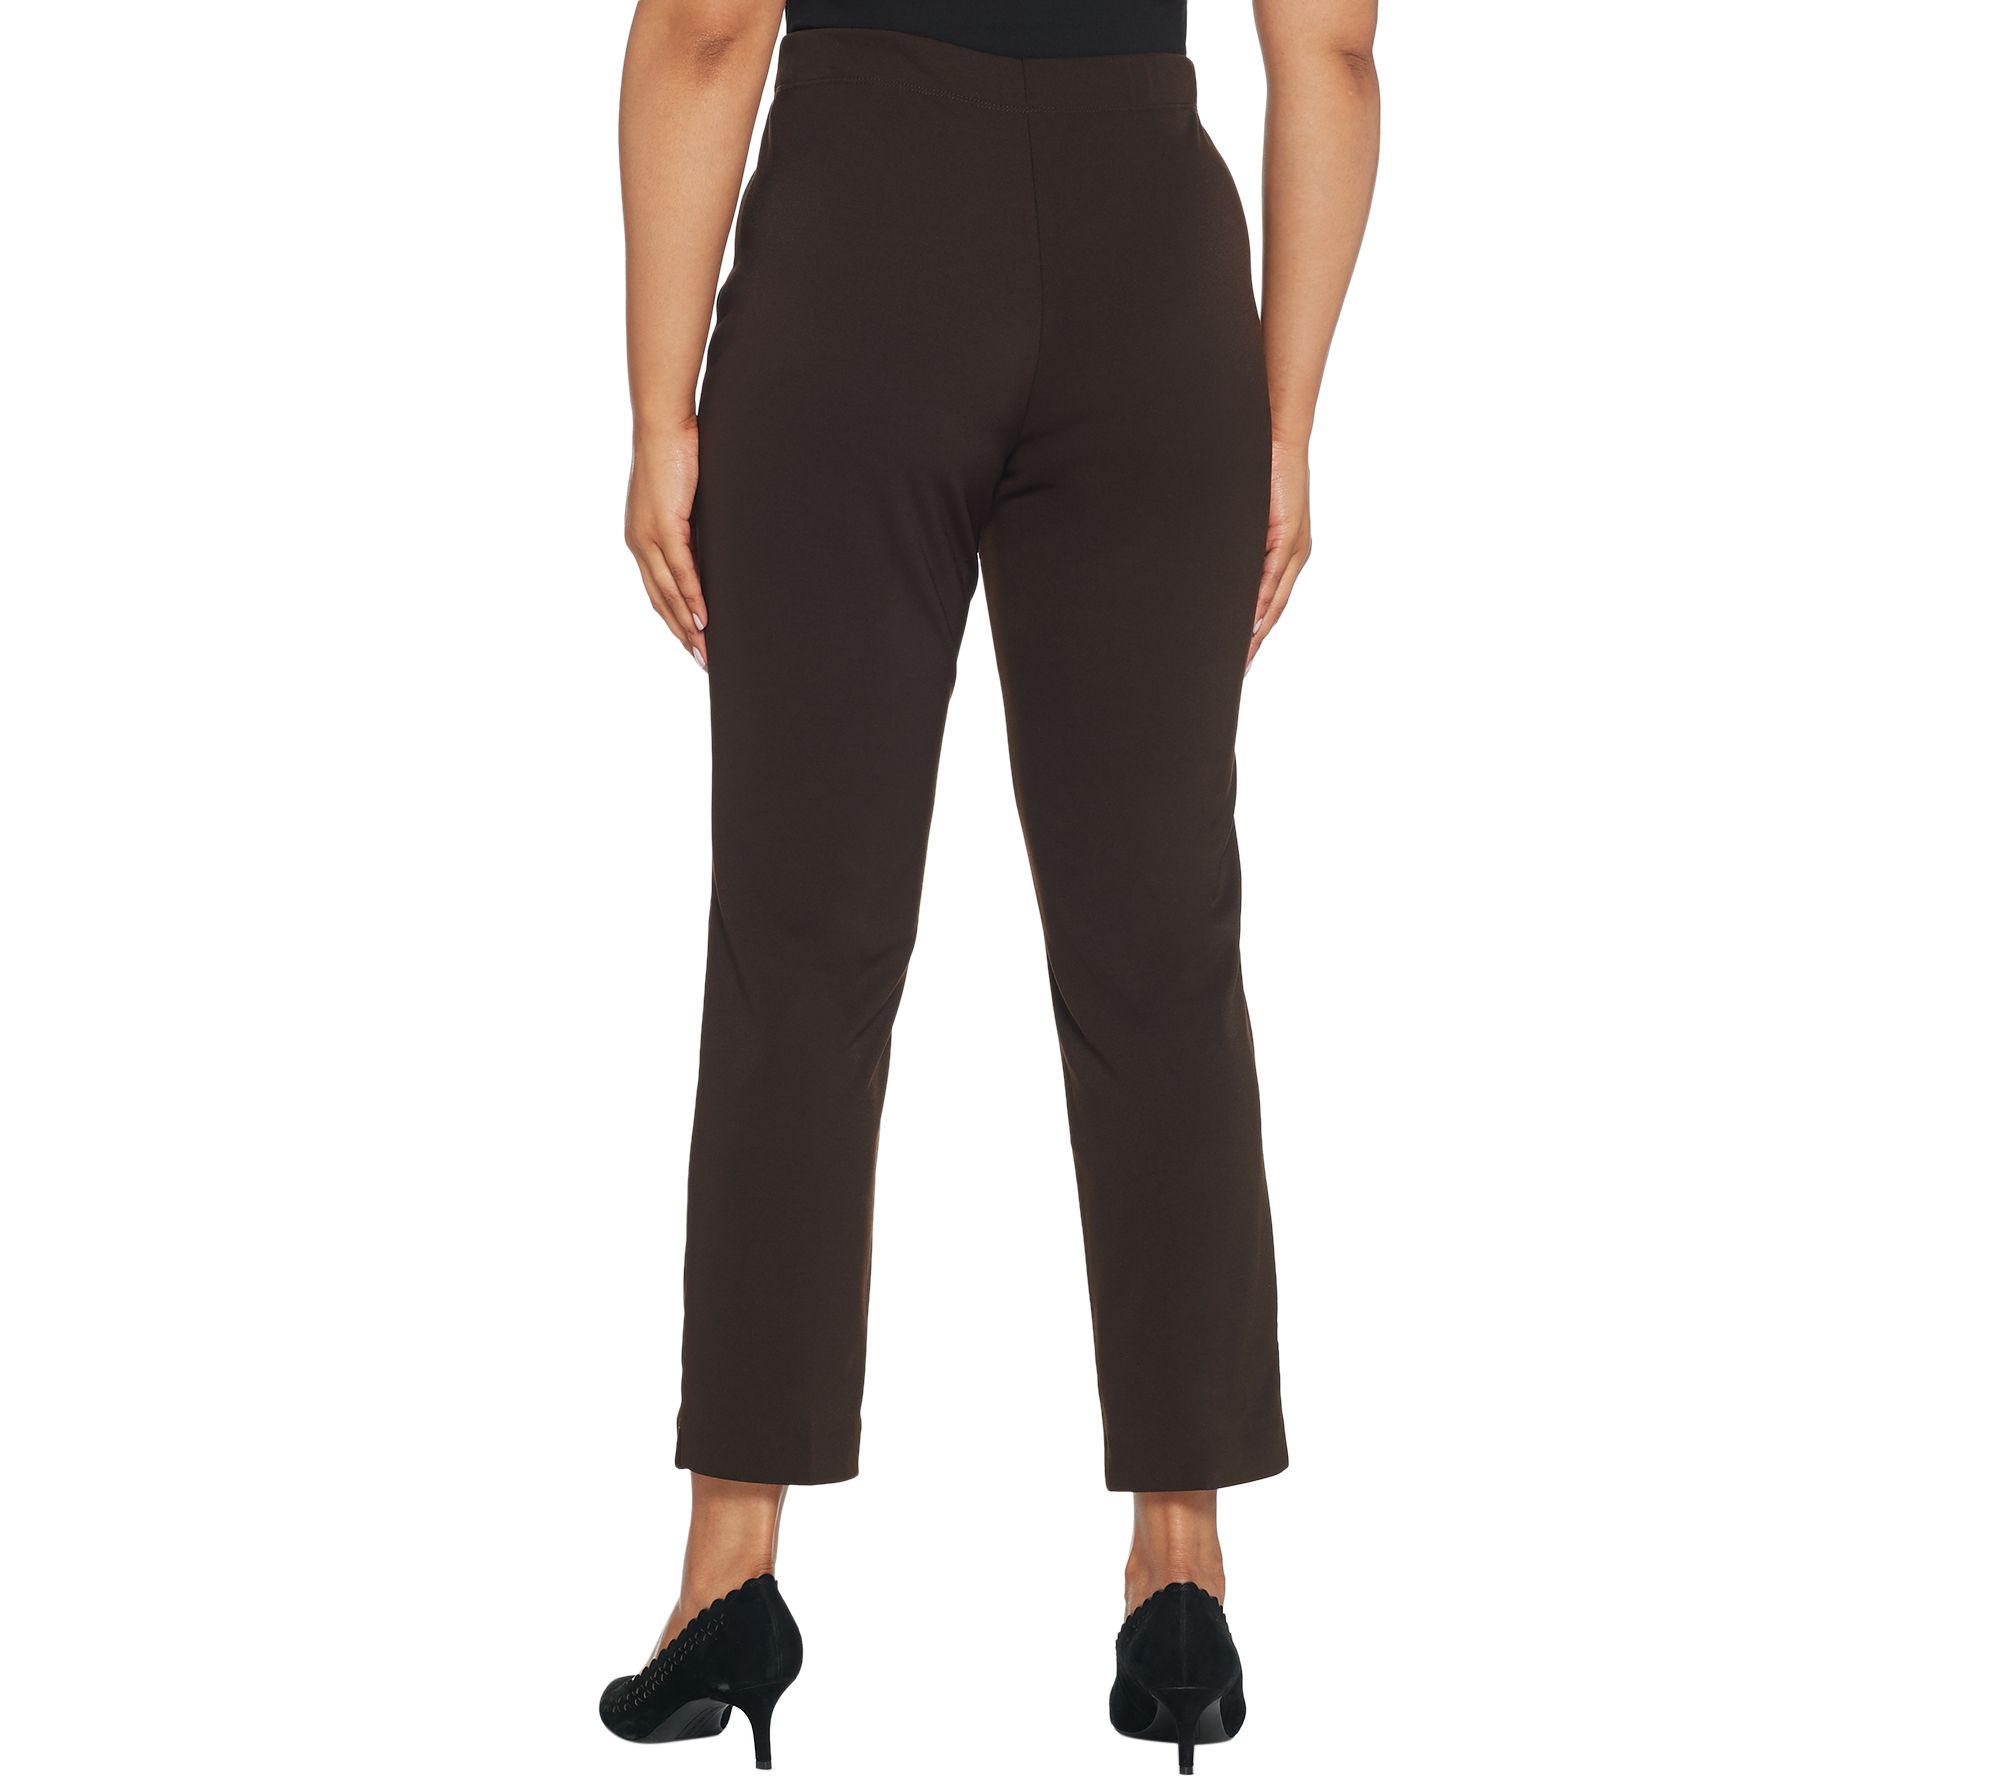 Susan Graver Petite Milano Knit Pull-On Pants with Pockets - QVC.com